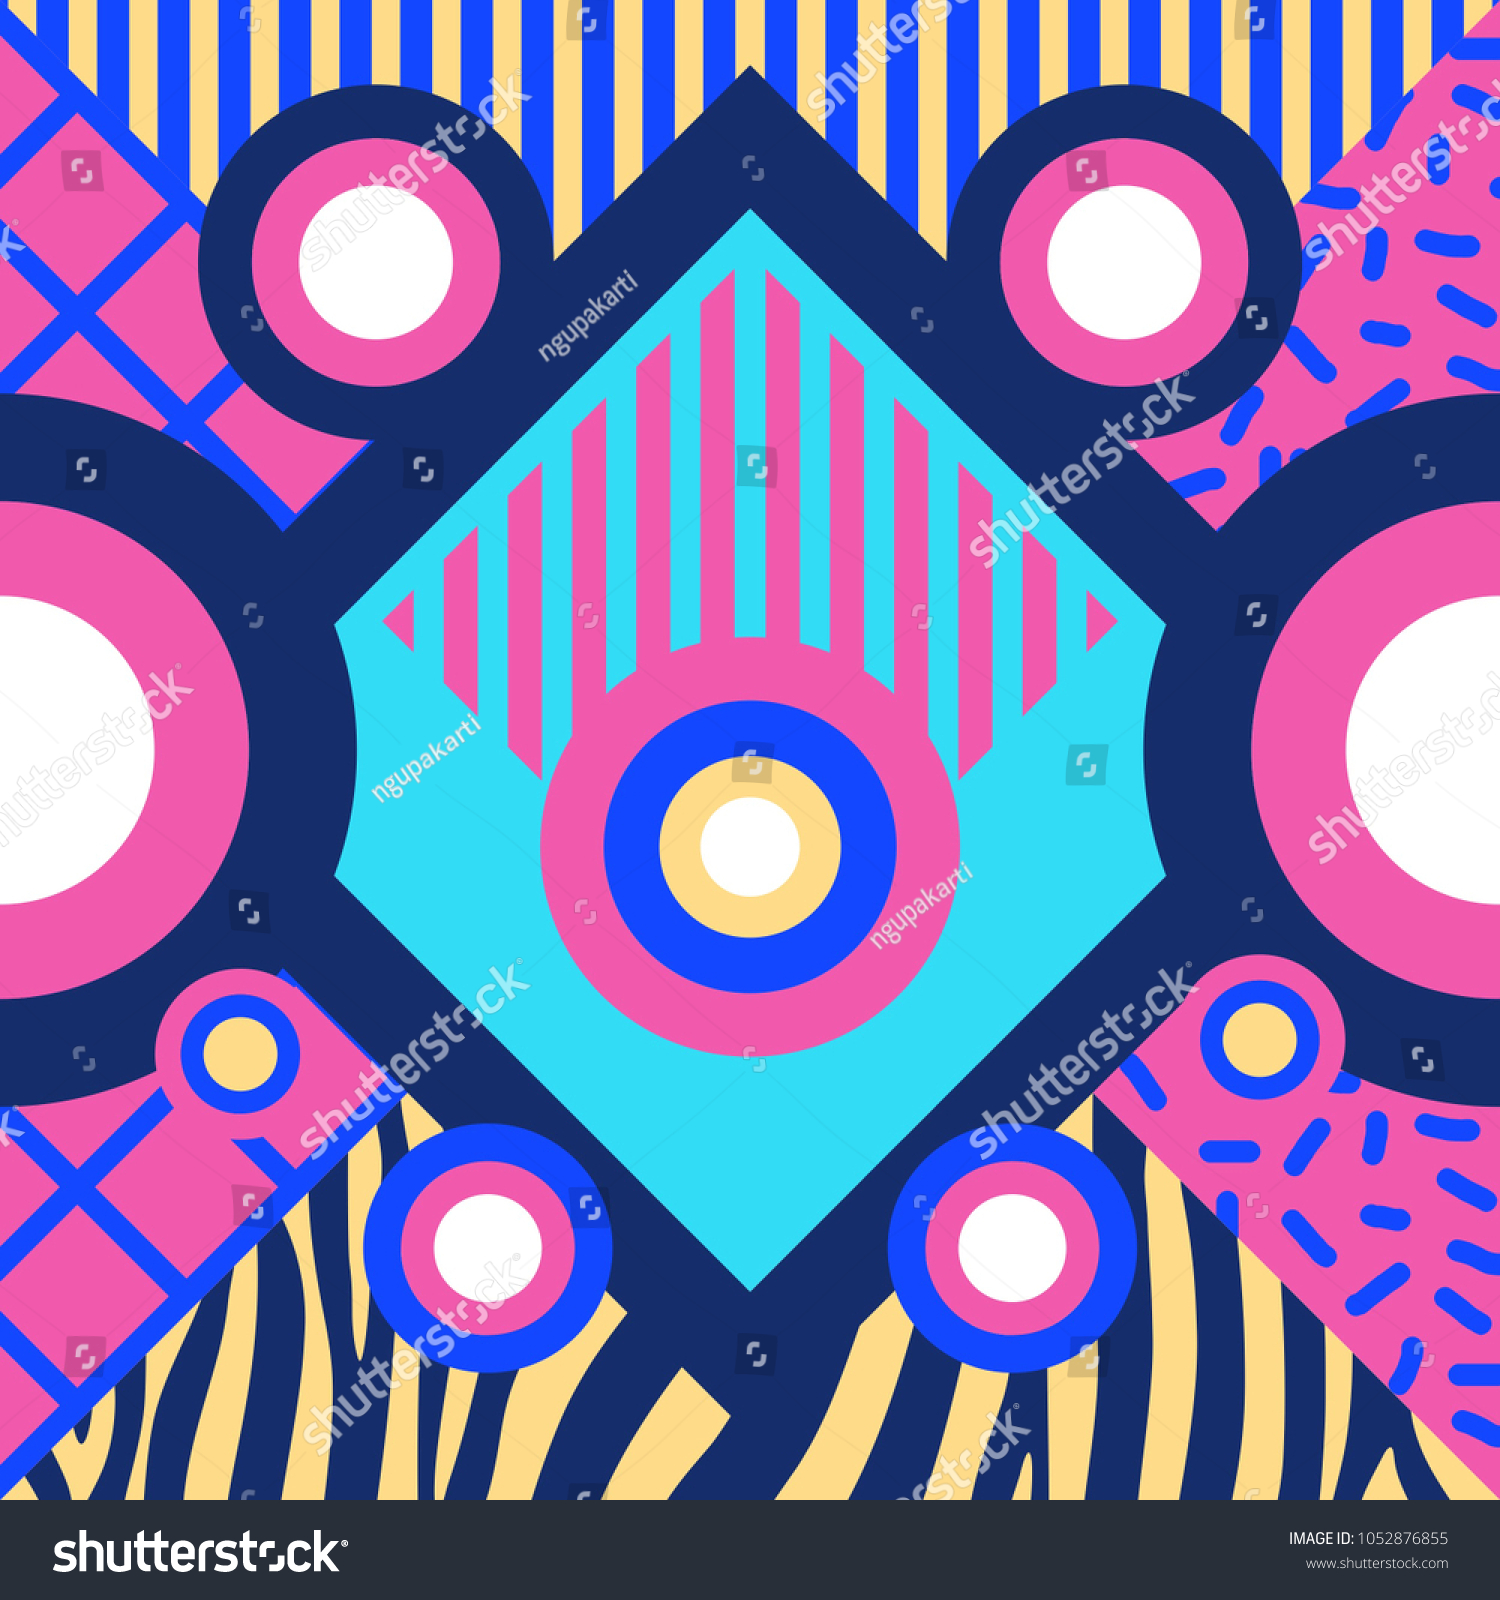 Abstract Background Design Fashion Geometric Illustration Stock Vector ...